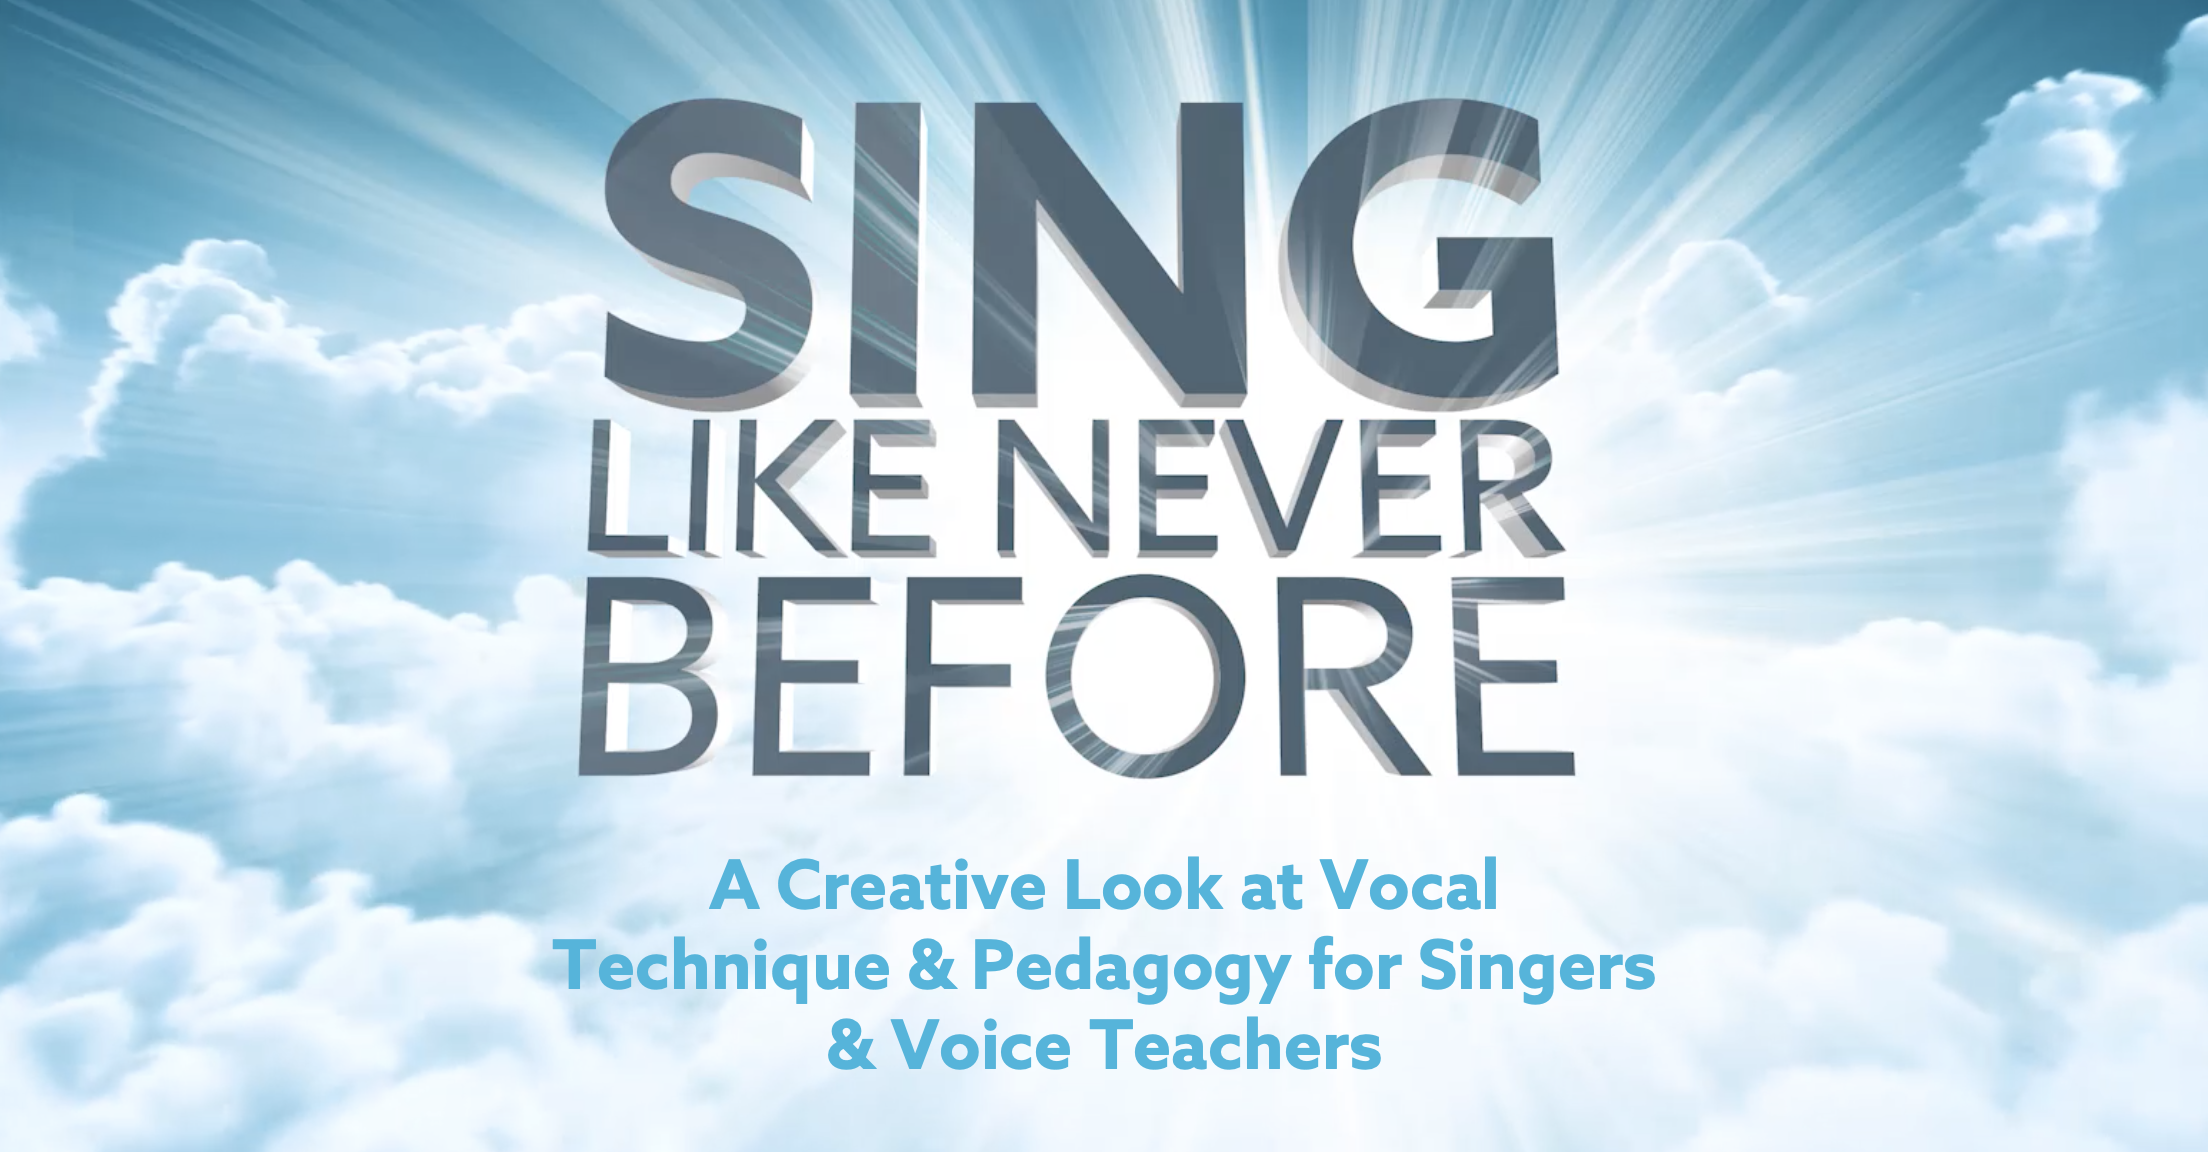 BroadwayWorld adds "Sing Like Never Before" to Fall Reading List hero